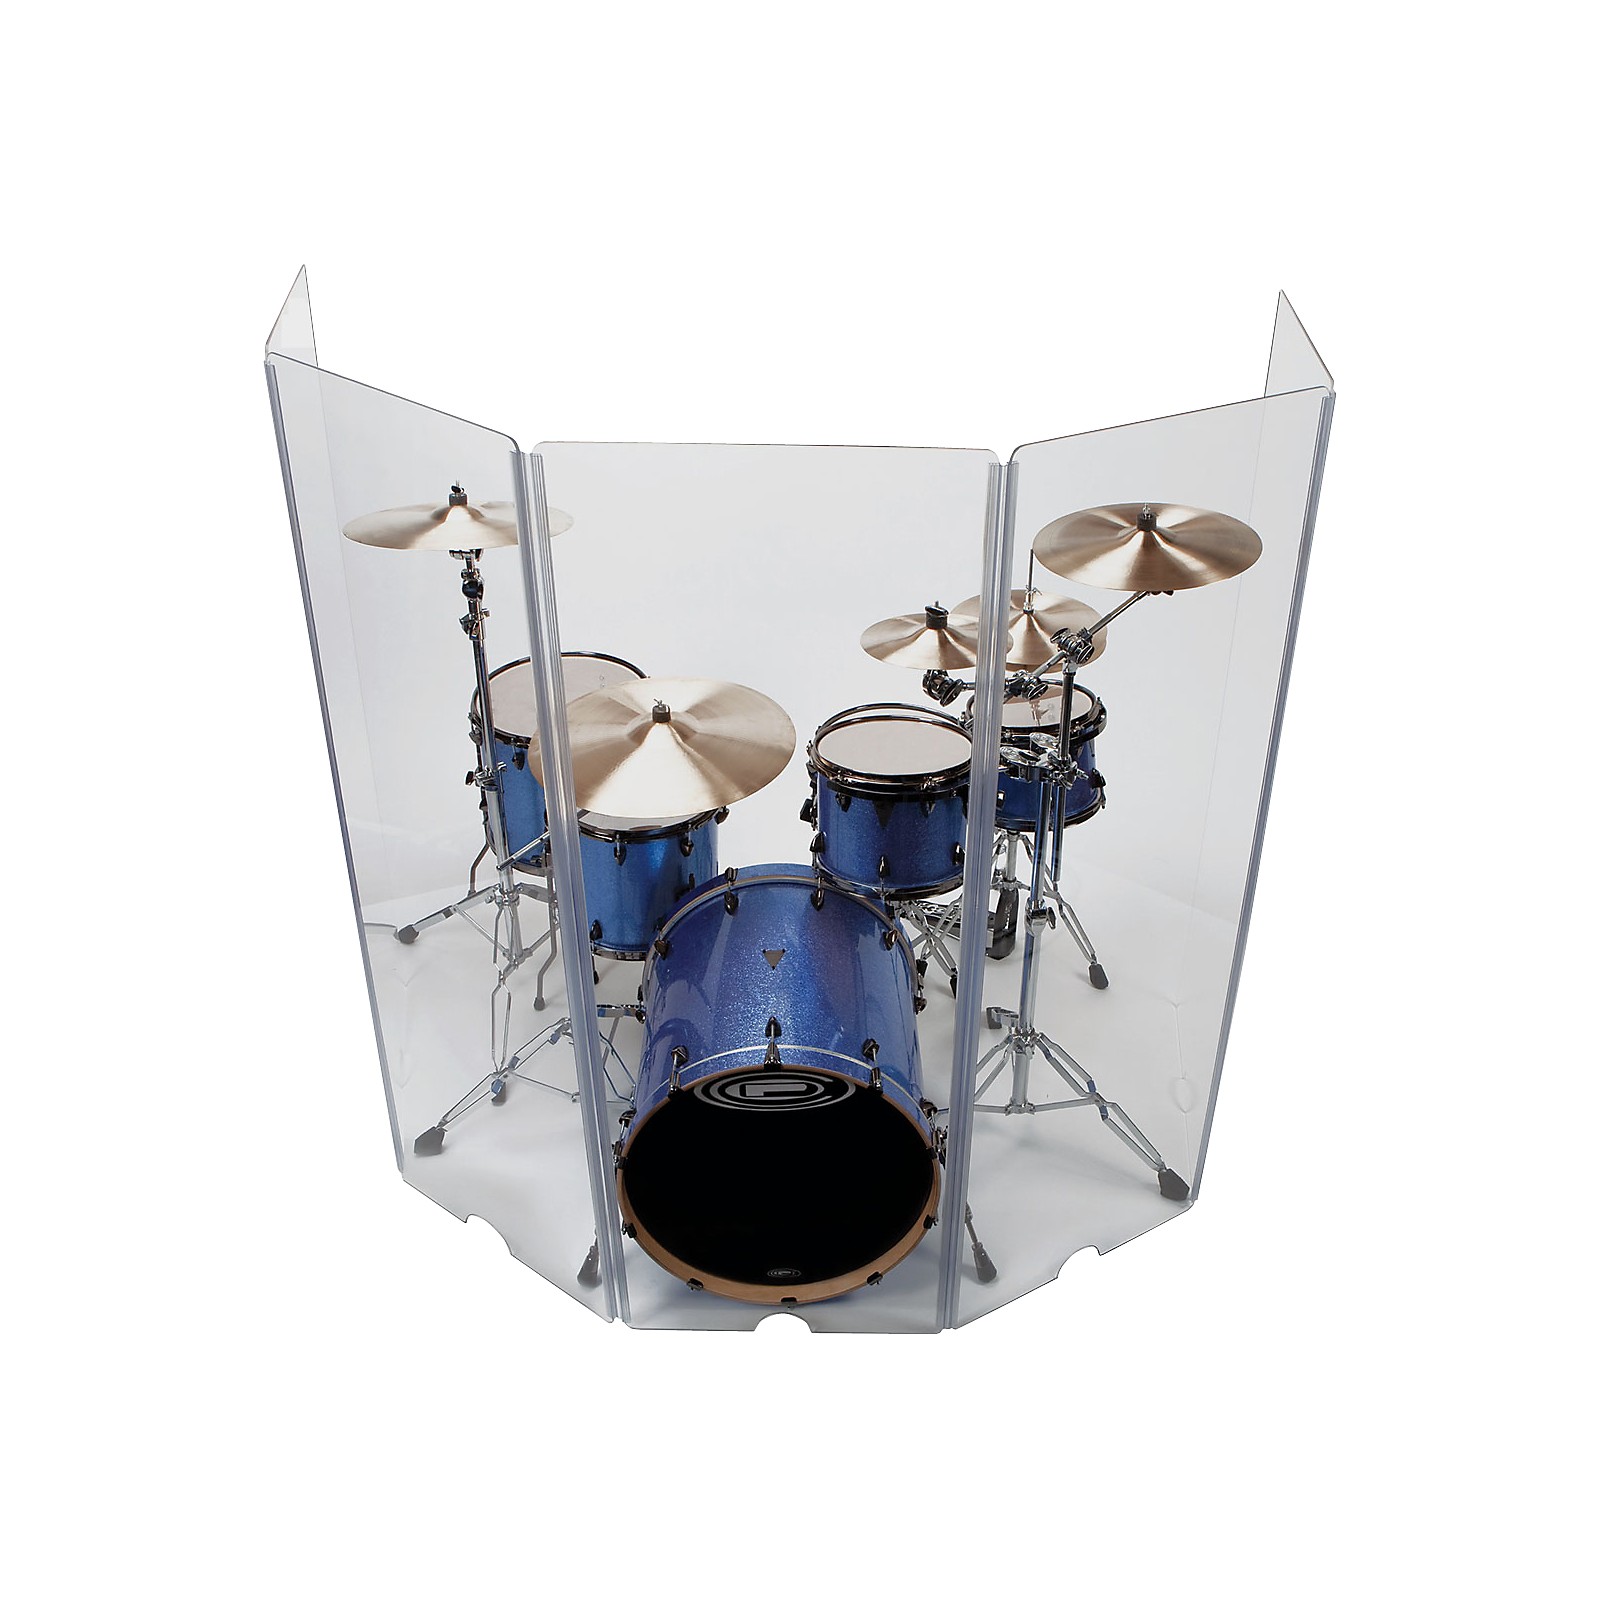 DistinctAndUnique 30 Inch Crystal Clear Acrylic Drum KIT Baffle Muffles Live Recording Standard Mounting On All Cymbal Stand Performance Shields Sound Barrier